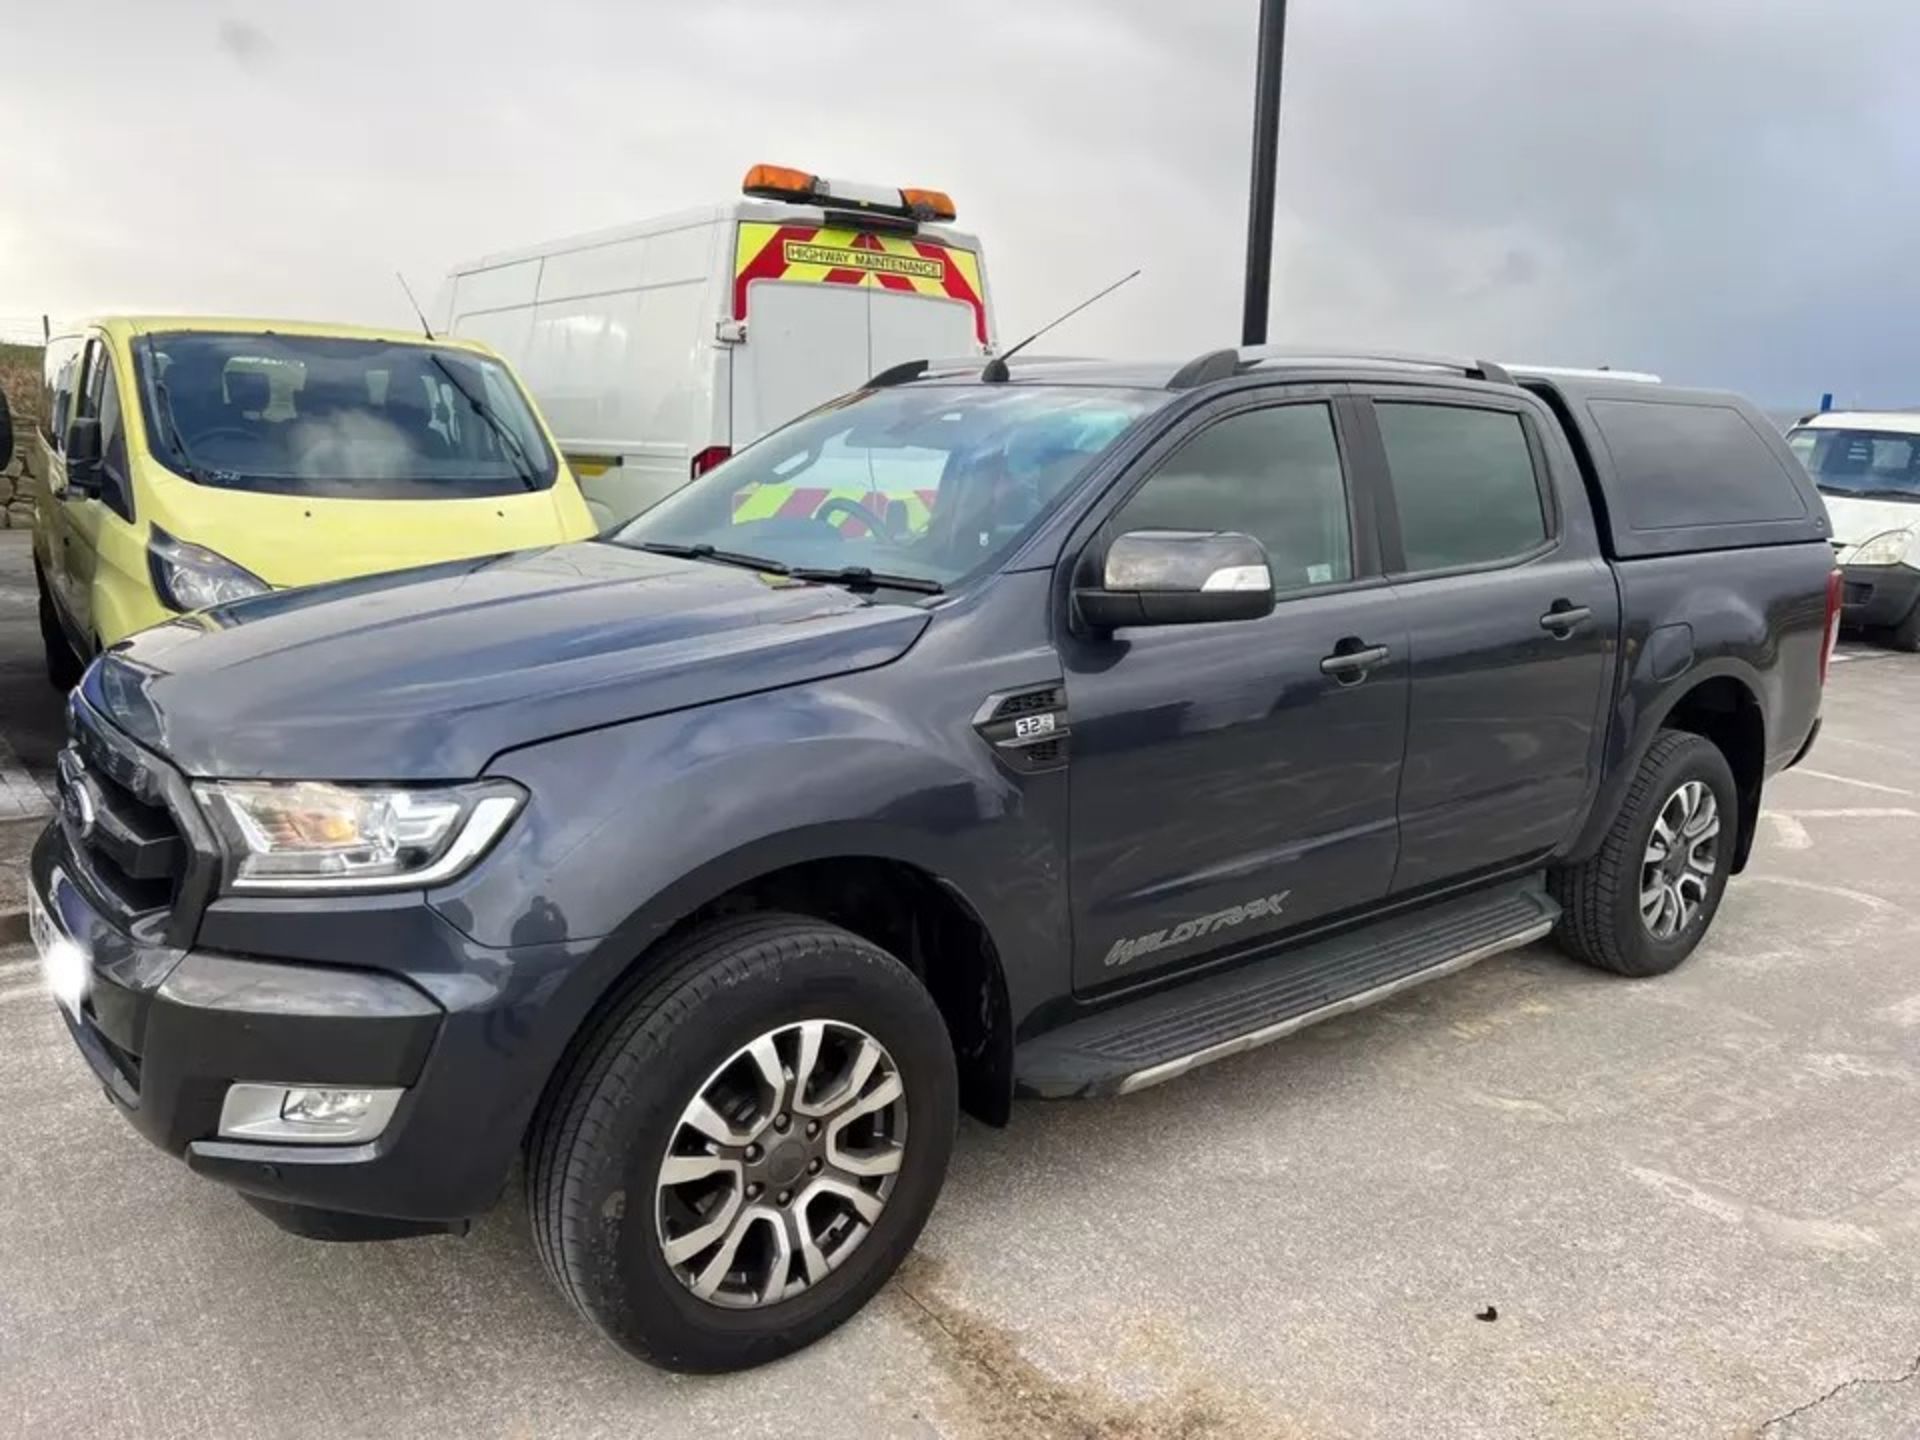 FORD RANGER WILDTRACK DOUBLE CAB 2018 - LOADED WITH FEATURES, IMPECCABLE CONDITION - Image 13 of 22